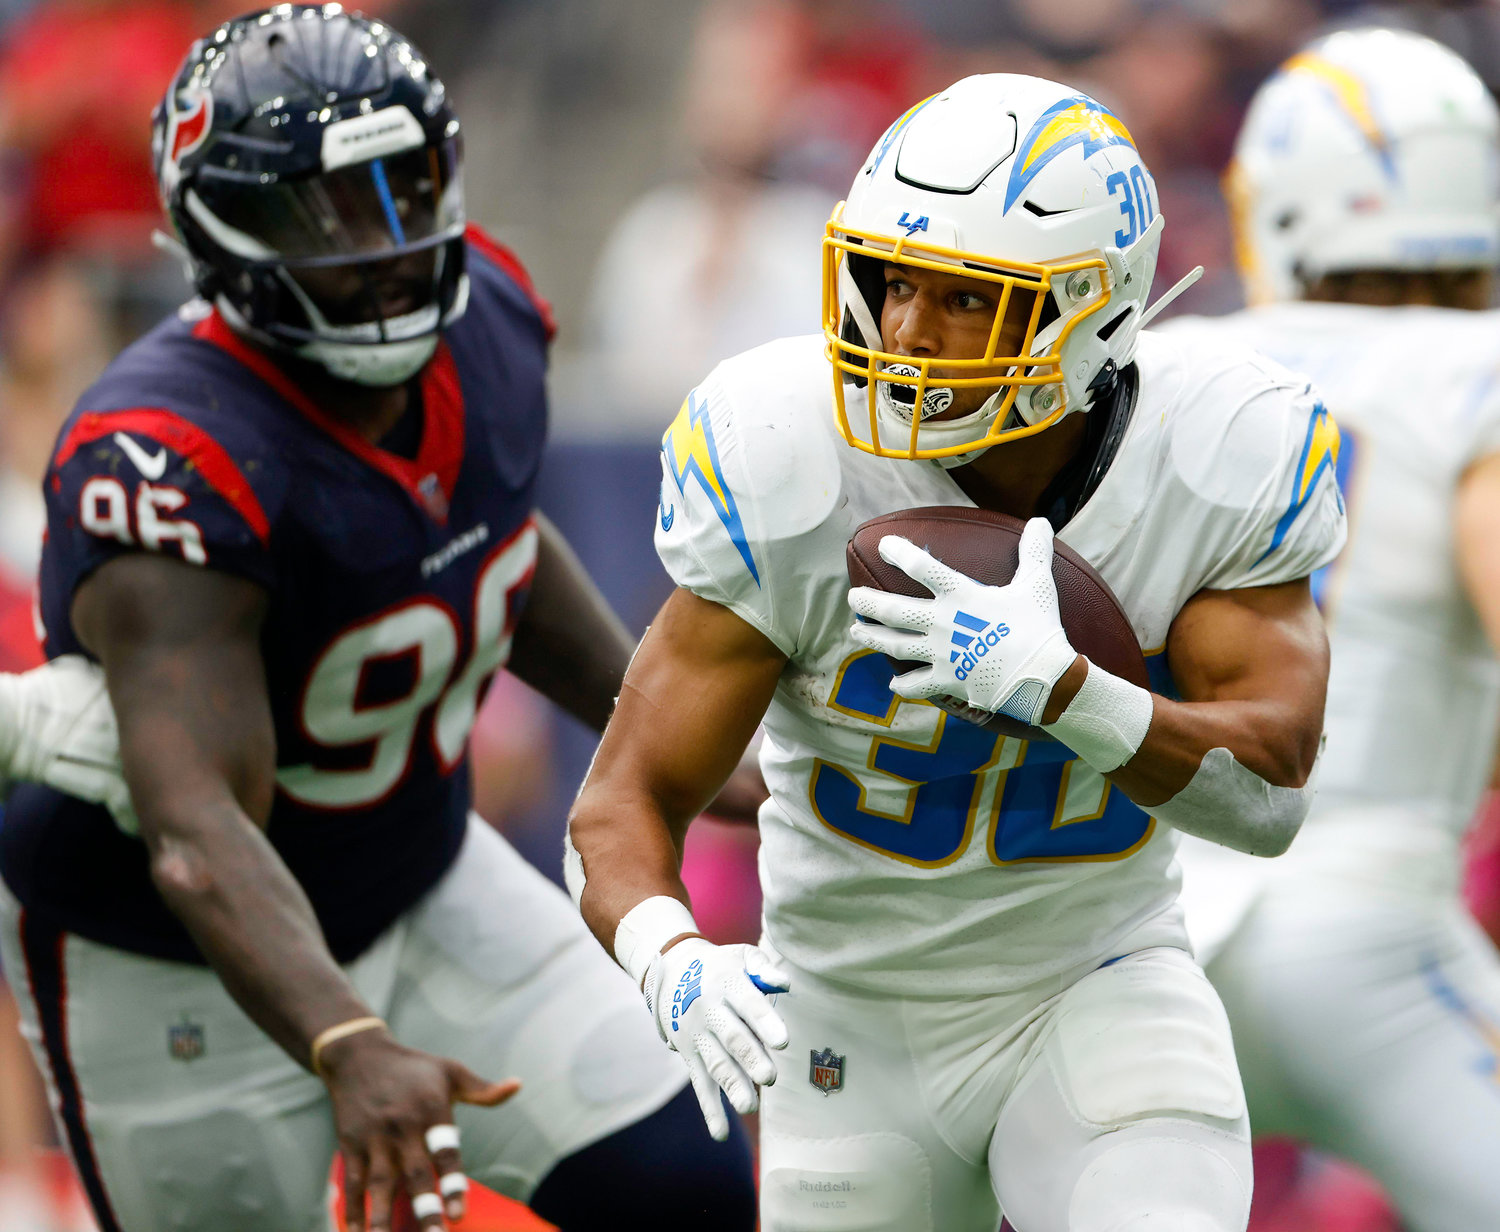 Chargers running back Austin Ekeler (30) carries the ball during an NFL game between the Texans and the Chargers on Oct. 2, 2022 in Houston. The Chargers won 34-24.